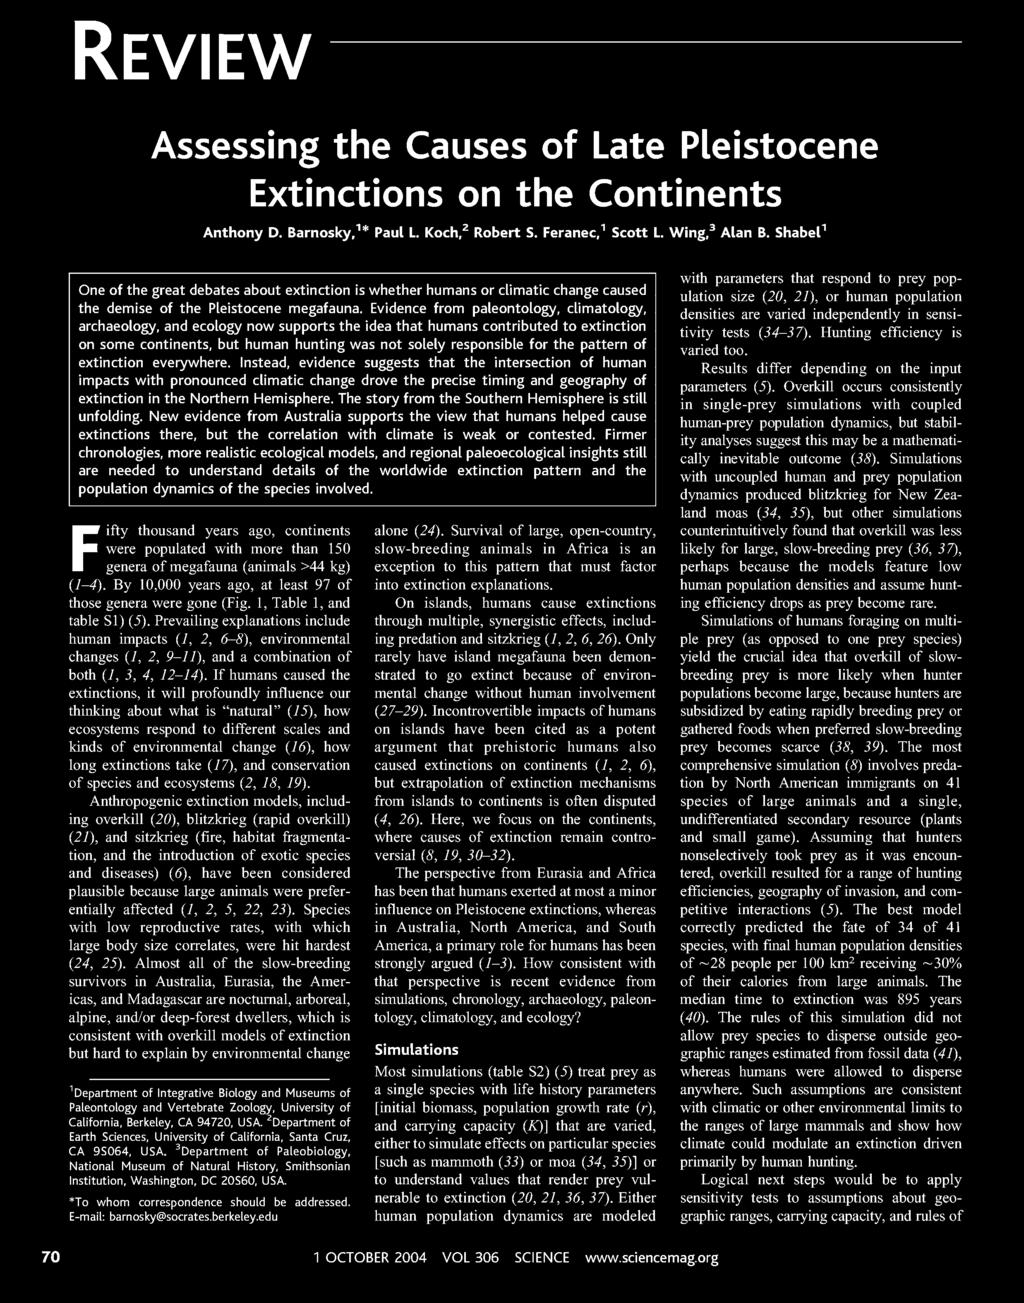 Evidence from paleontology, climatology, archaeology, and ecology now supports the idea that humans contributed to extinction on some continents, but human hunting was not solely responsible for the